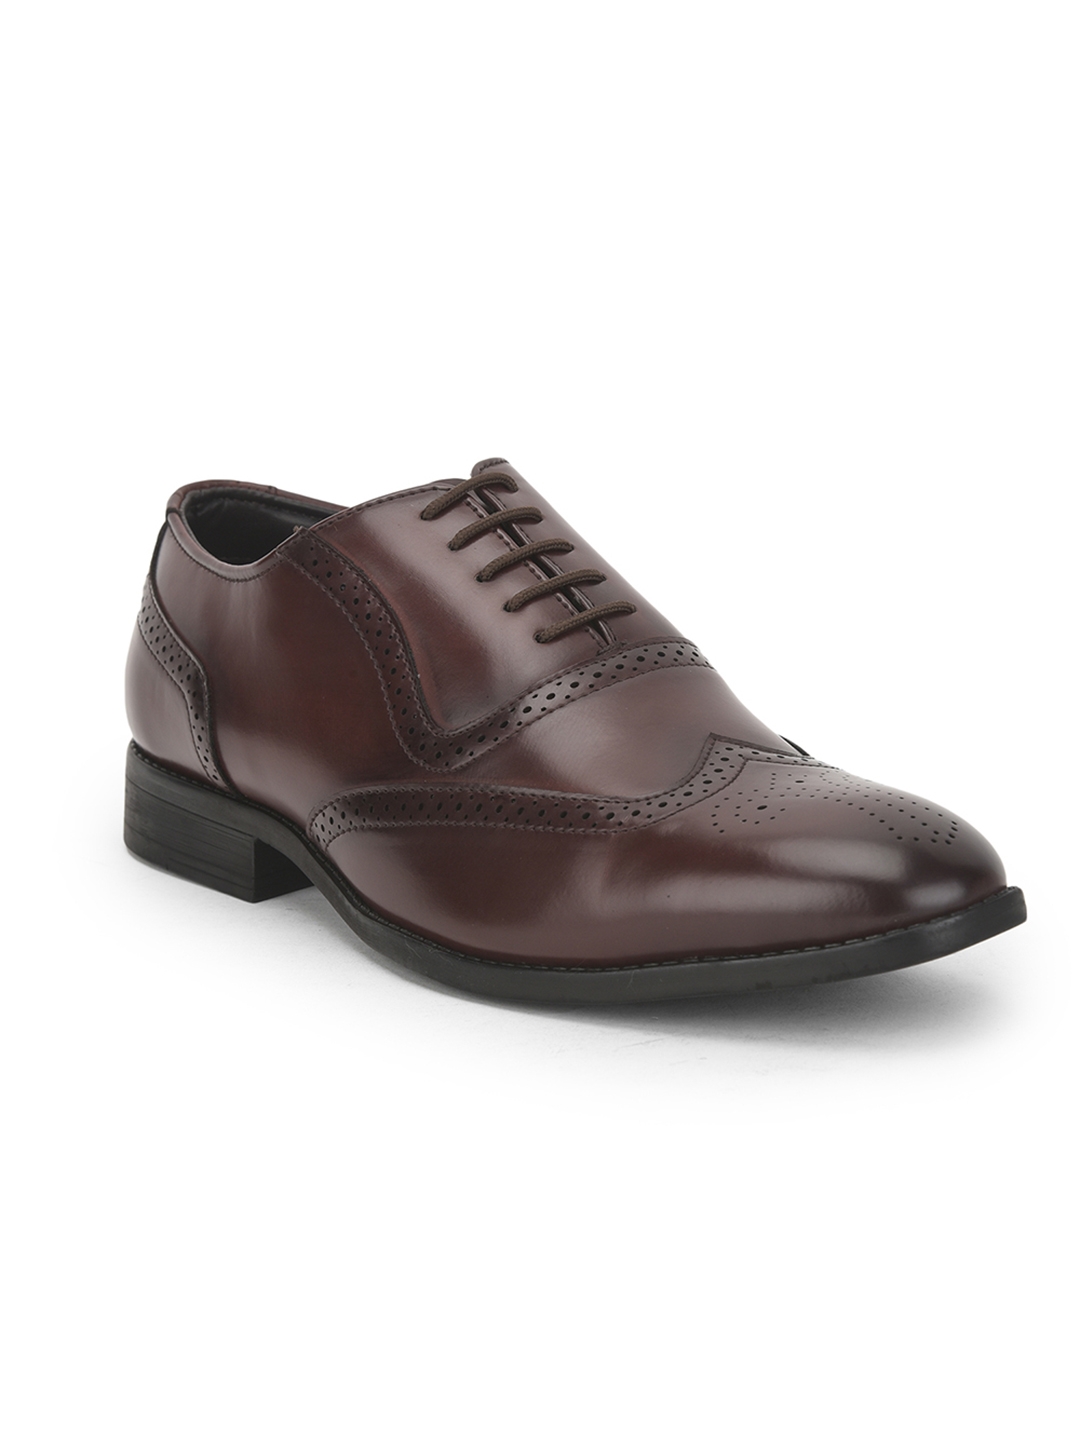 Liberty | Fortune by Liberty CHERRY Formal Shoes JPL-300E For :- Men